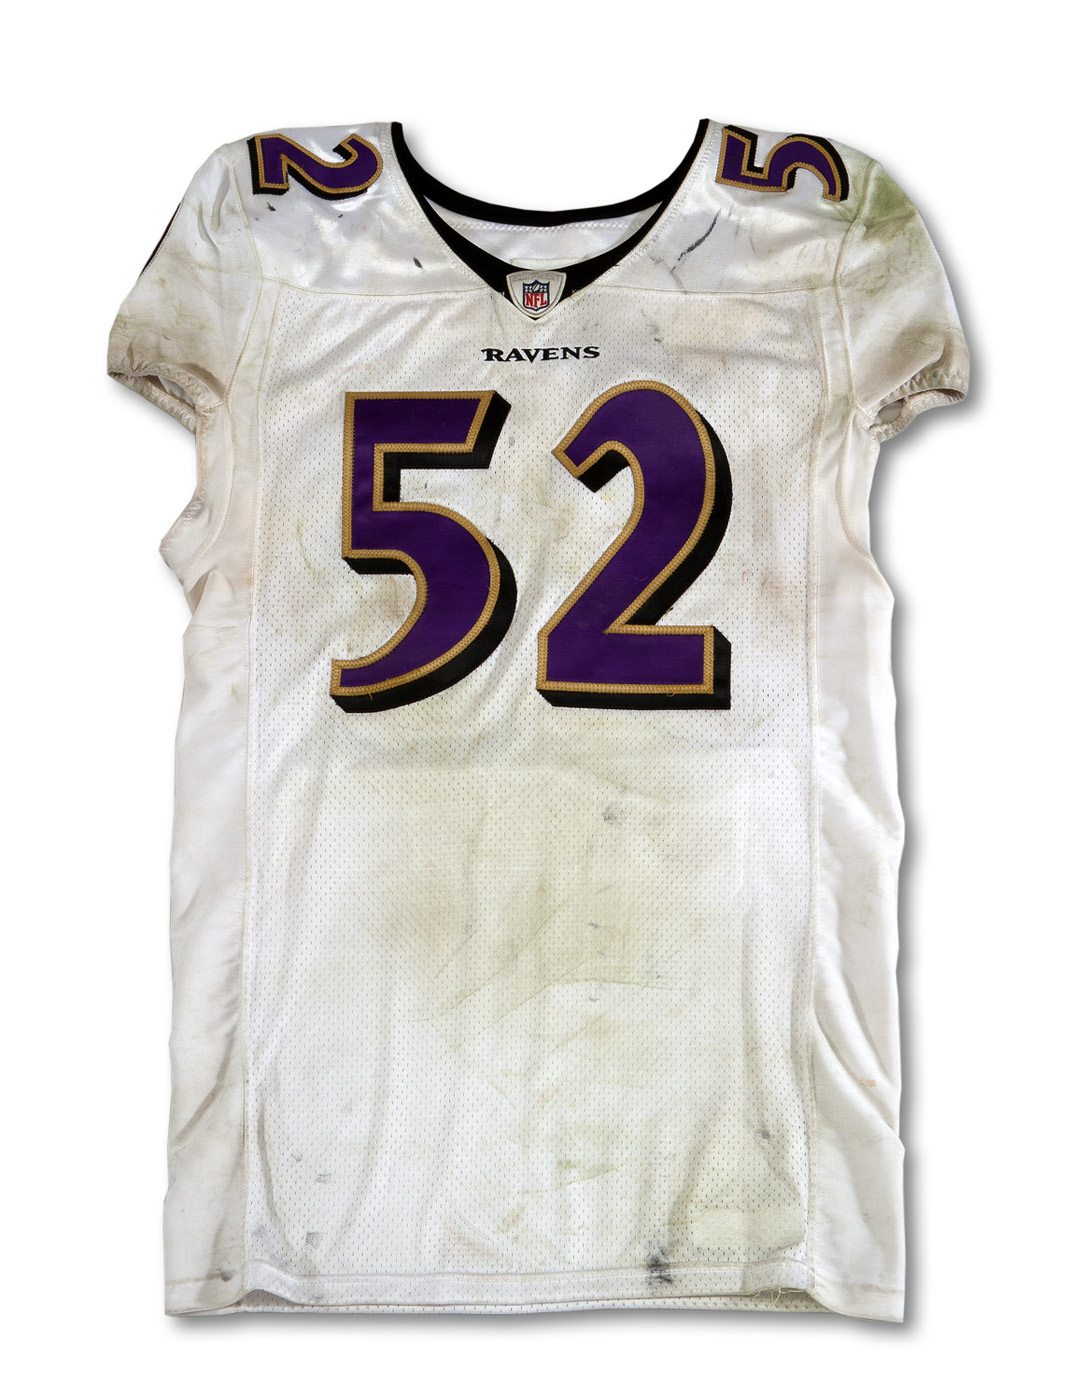 Lot Detail - RAY LEWIS 1/15/11 BALTIMORE RAVENS AUTOGRAPHED DIVISIONAL  PLAYOFF GAME WORN JERSEY (AT PITTSBURGH) INSCRIBED 'GAME WORN 1/15/11  PITTSBURGH STEELERS' WITH PHENOMENAL GAME WEAR (MULTIPLE PHOTOMATCHES)